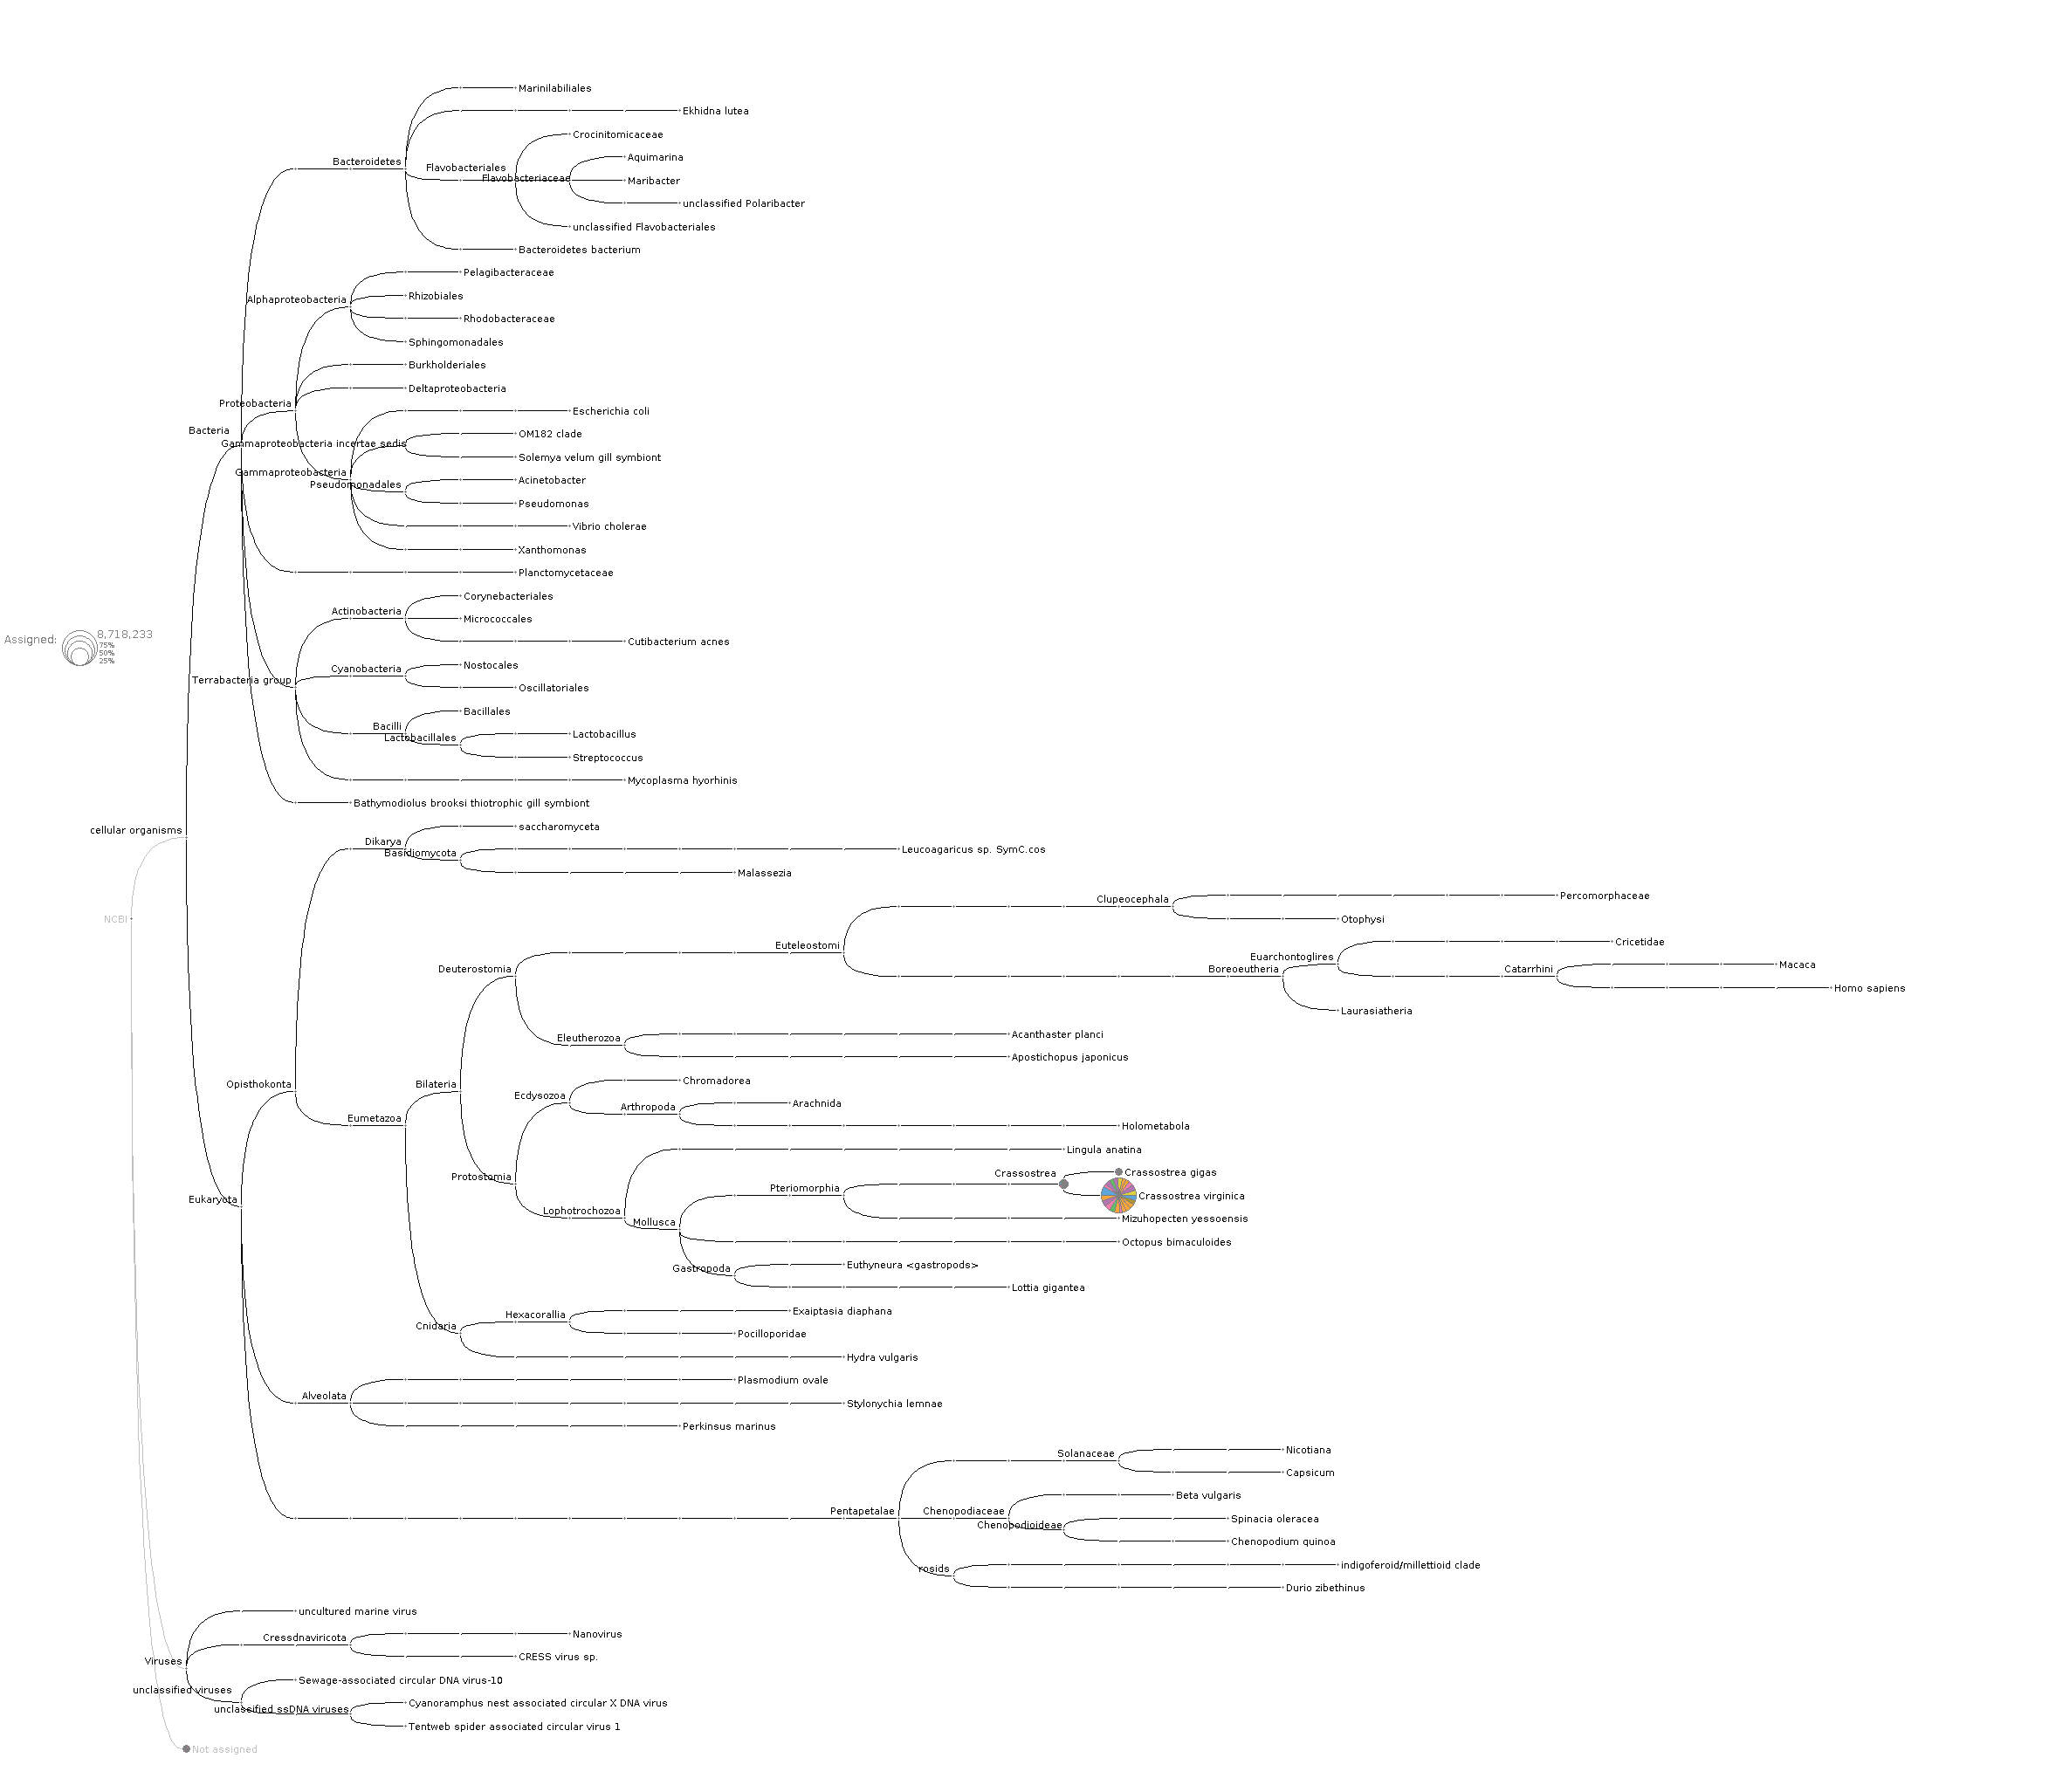 Phylogenetic tree of unmapped BSseq reads generated by MEGN6 software showing that most reads in all samples examined are assigned to the Species"Crassostrea virginica"